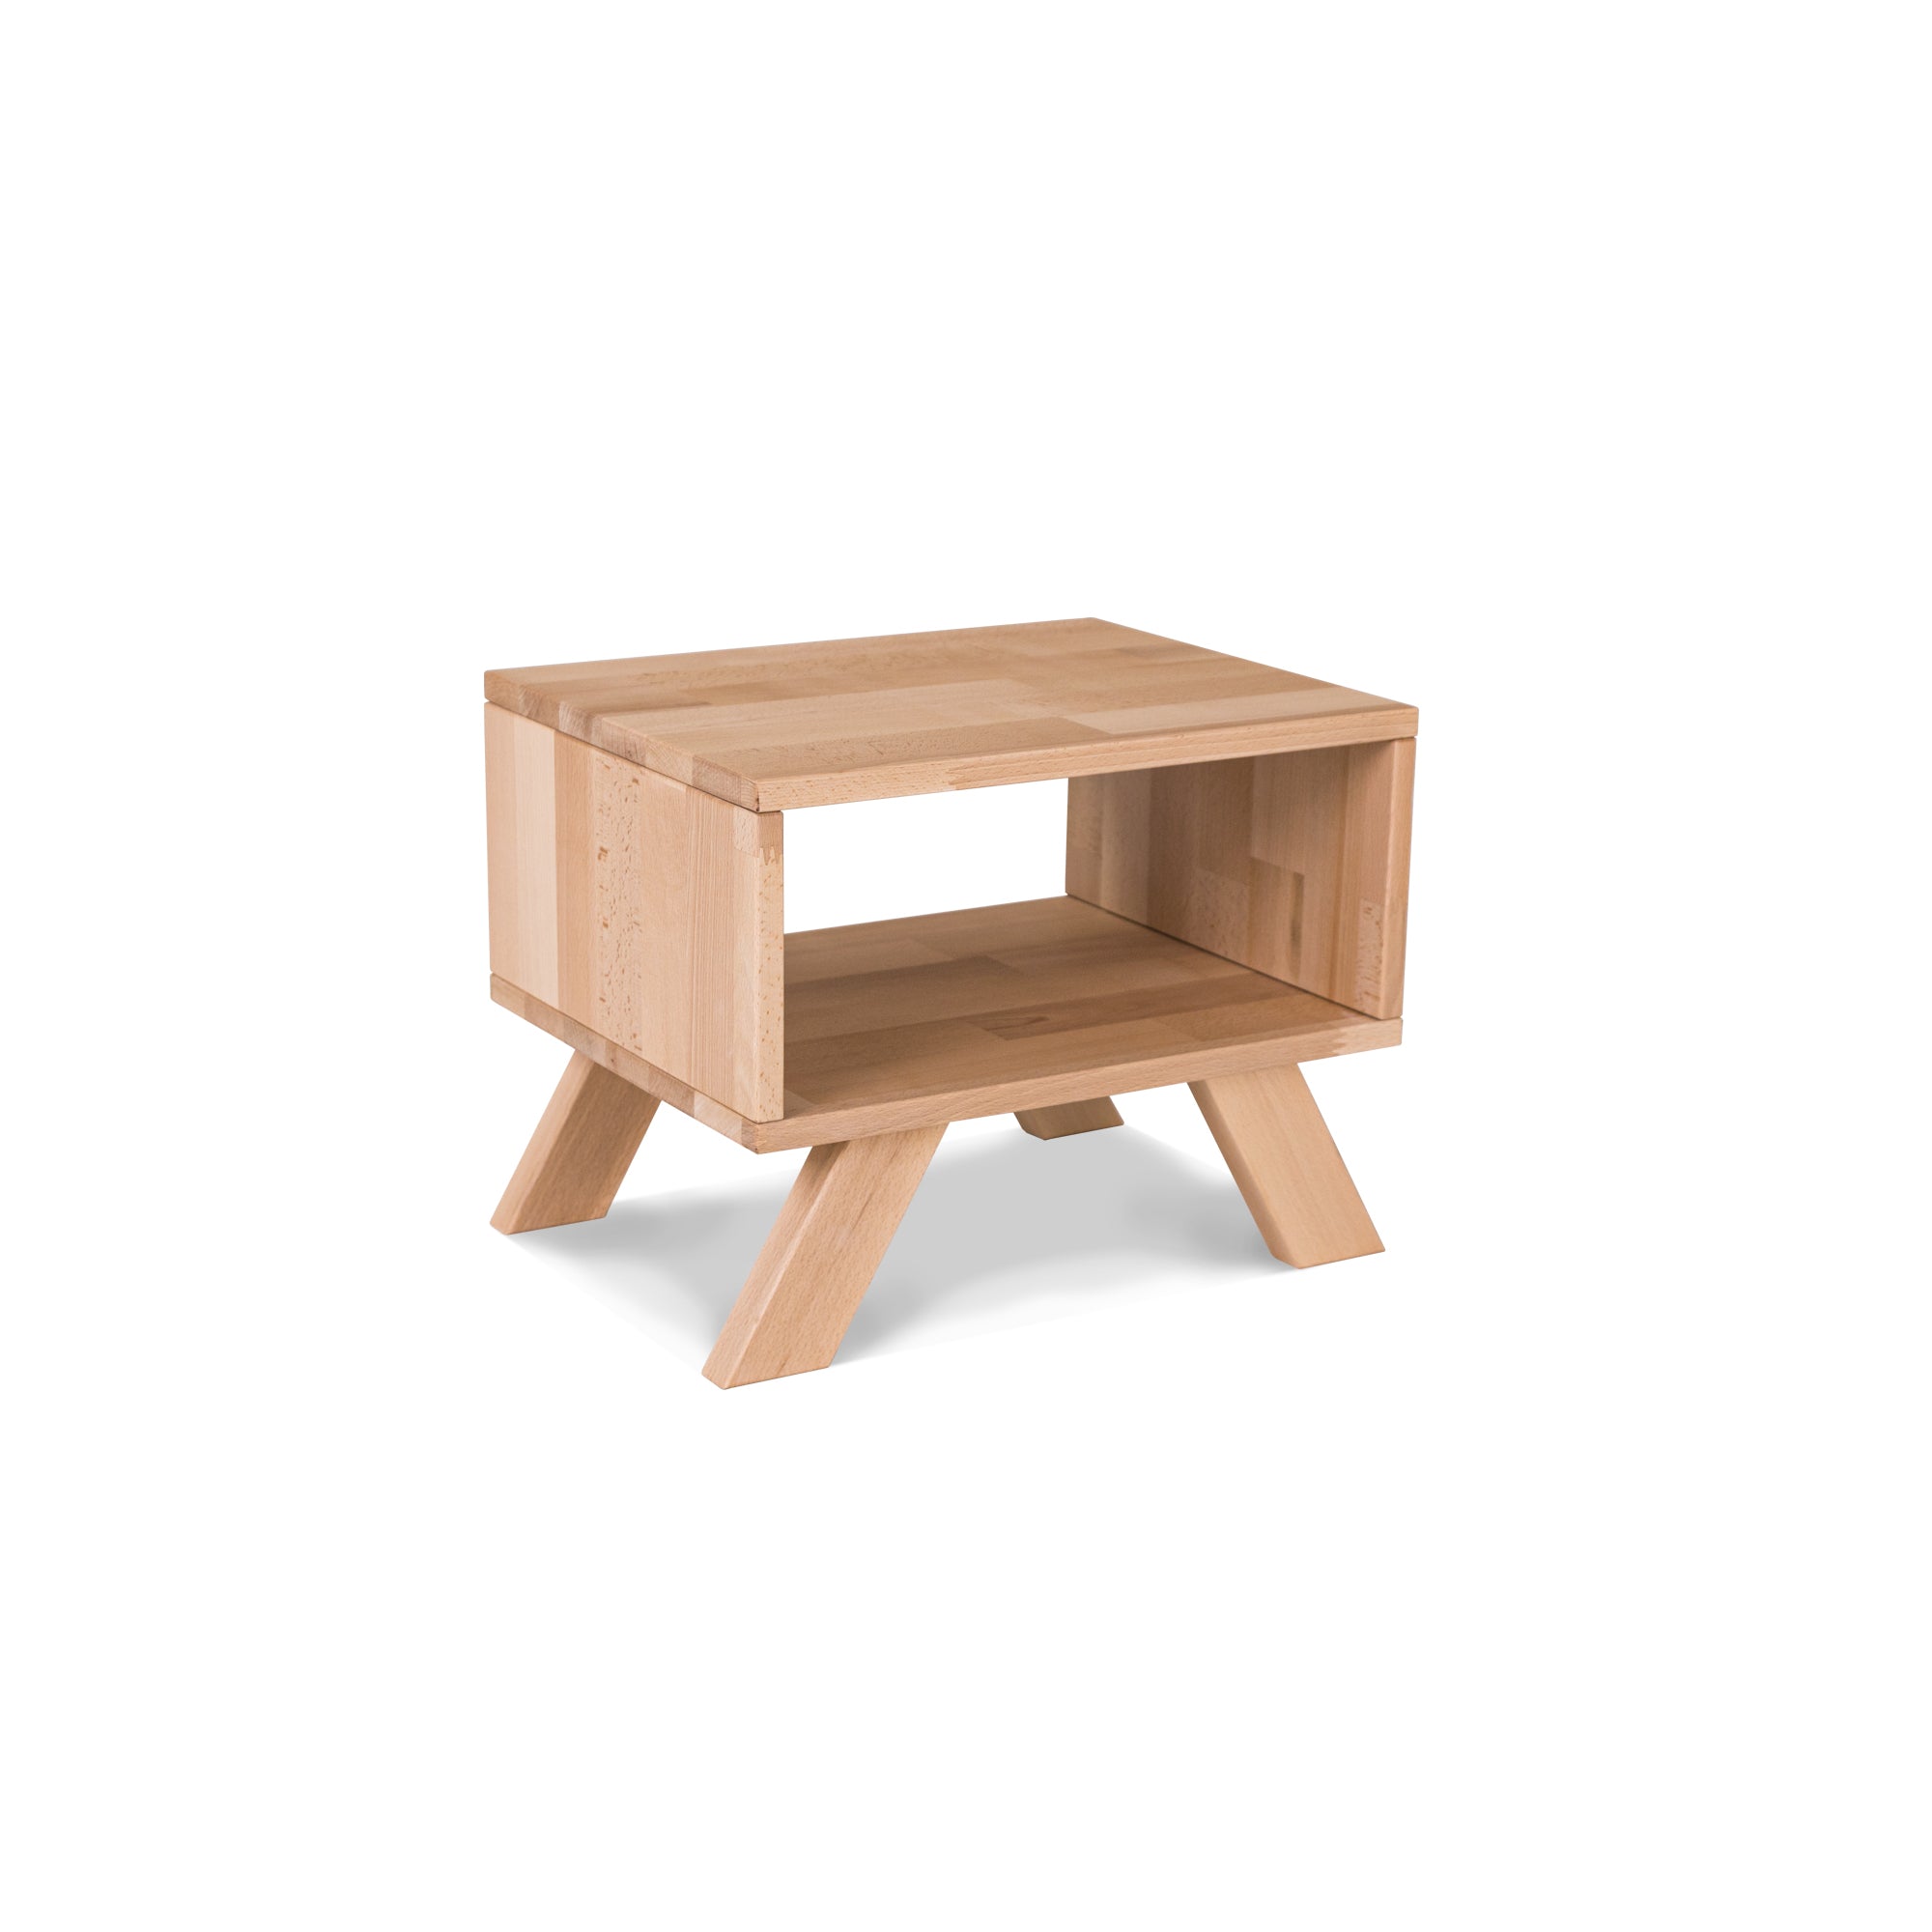 ALLEGRO Bedside Table, Beech Wood Untreated